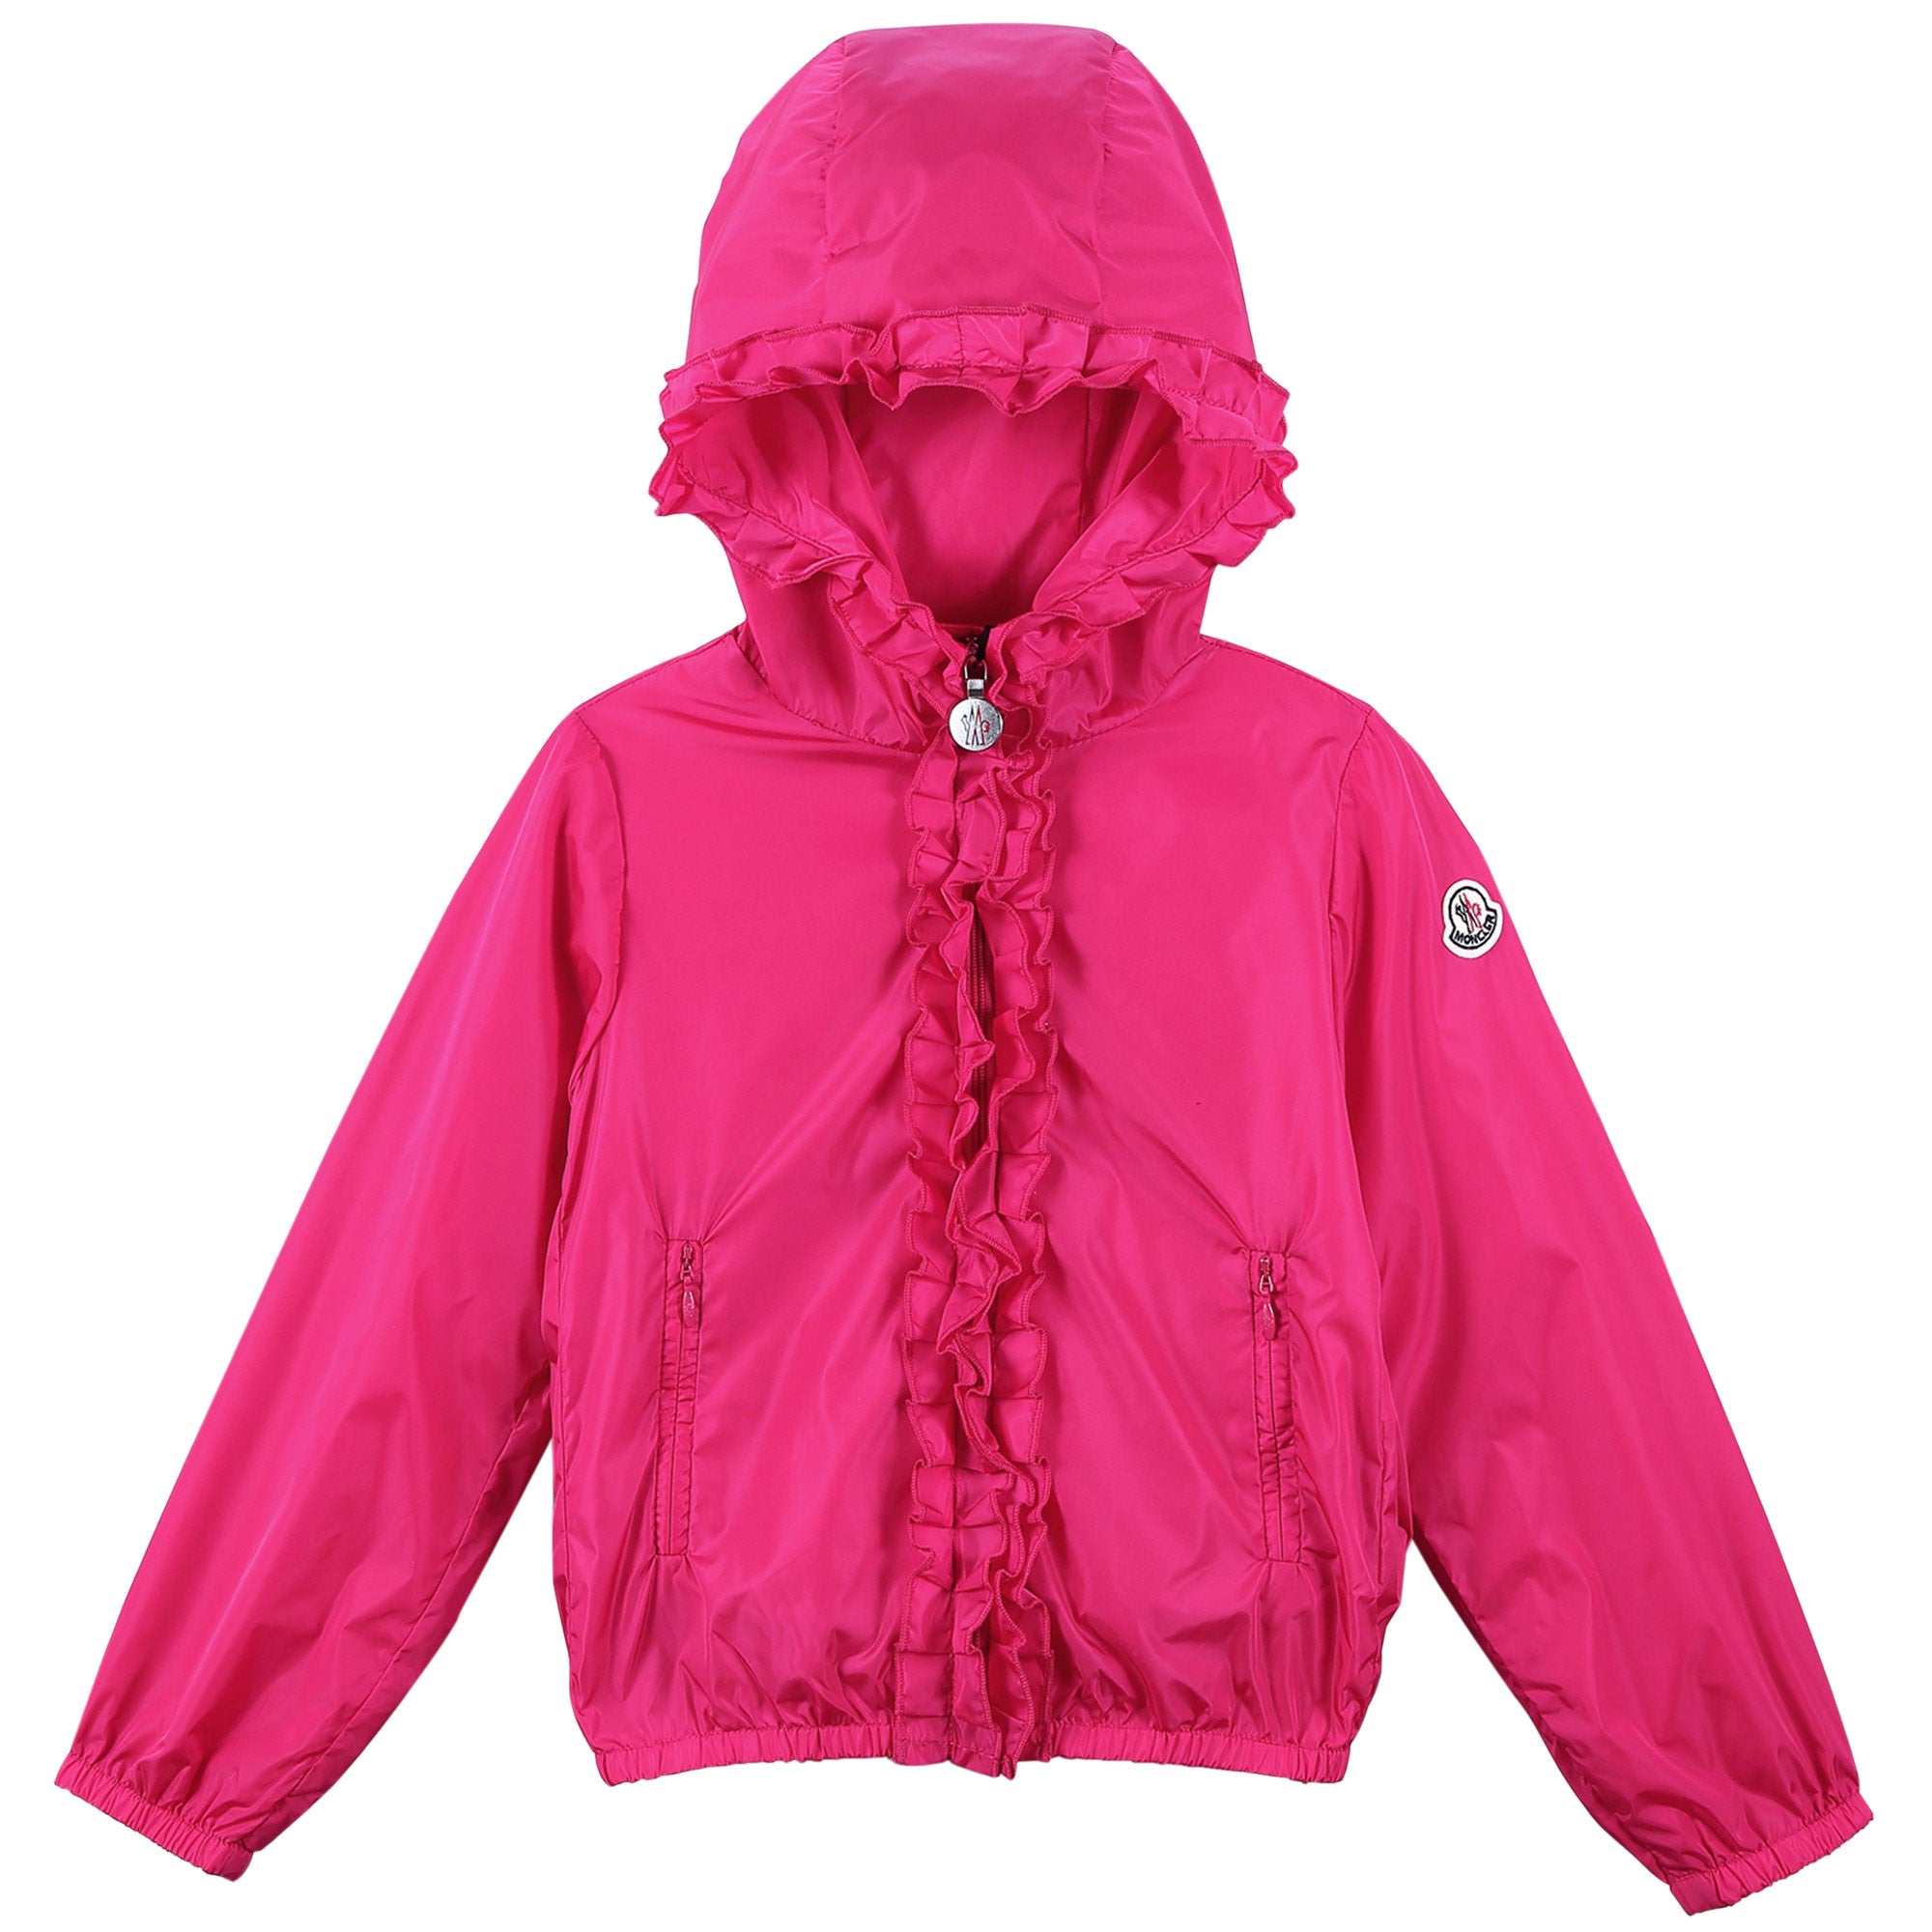 Girls Rose Red Frilly Hooded 'Darma' Zip-Up Tops - CÉMAROSE | Children's Fashion Store - 1